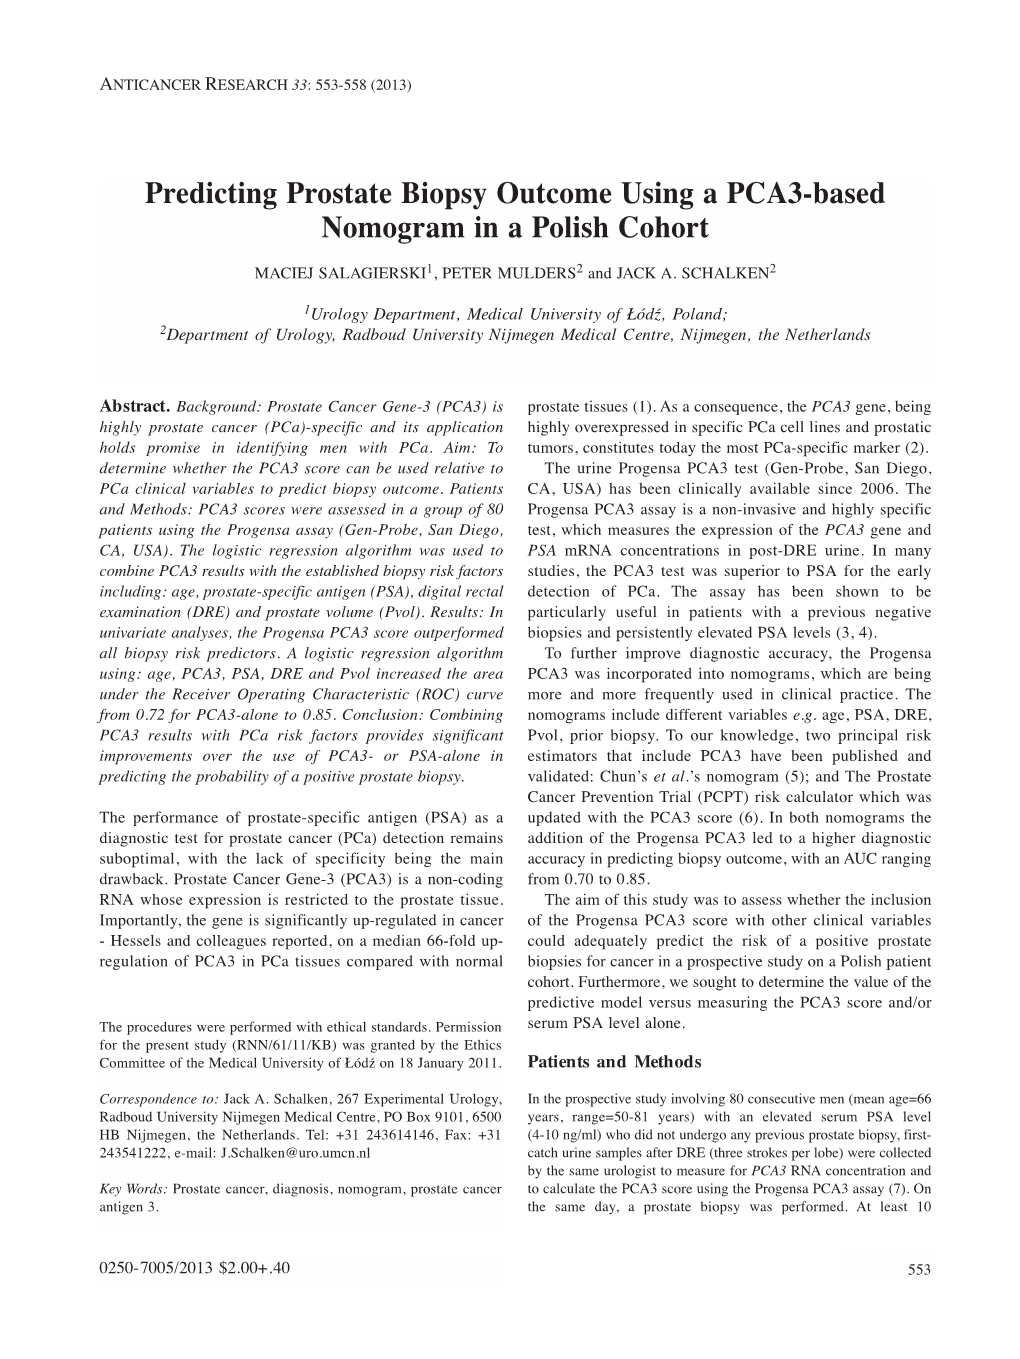 Predicting Prostate Biopsy Outcome Using a PCA3-Based Nomogram in a Polish Cohort